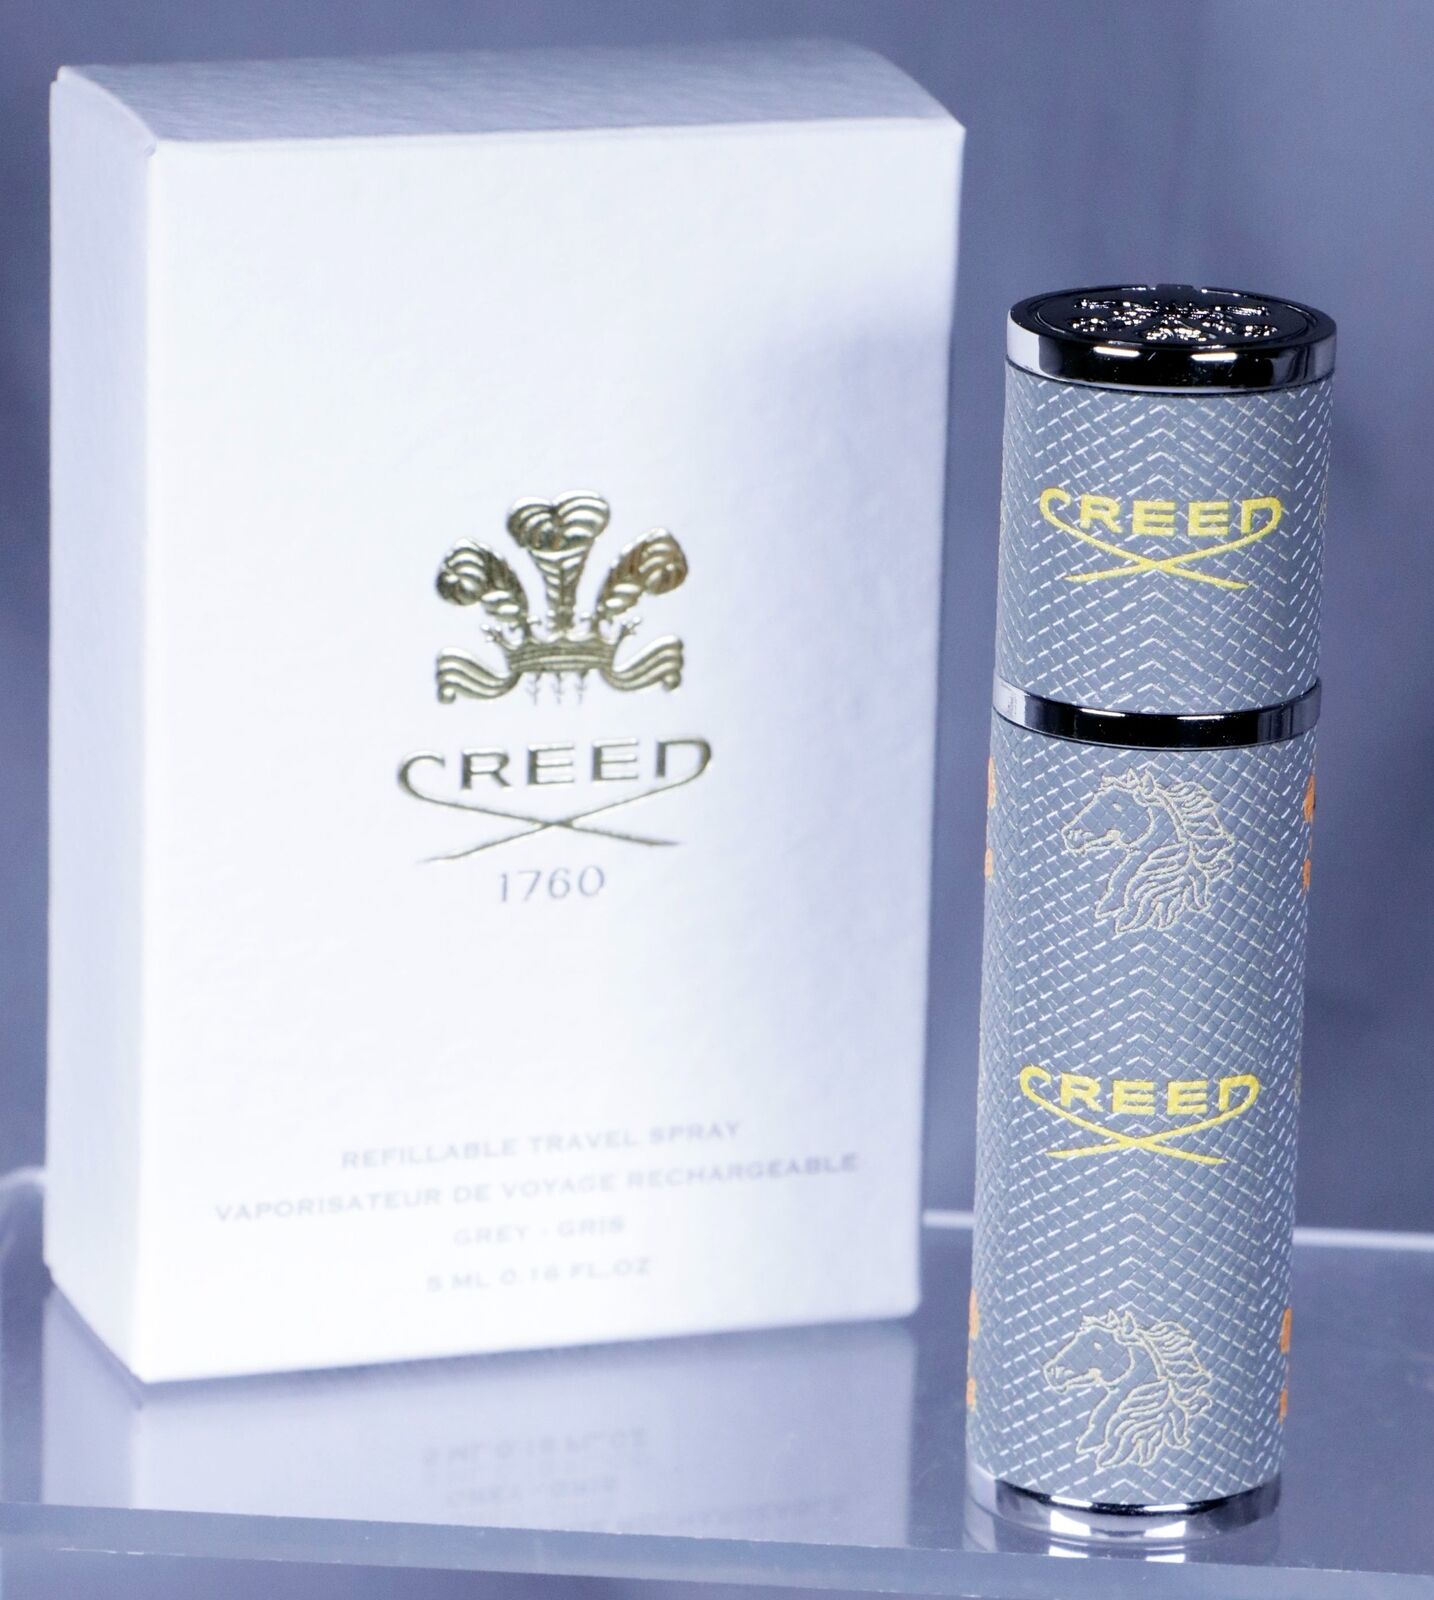 Creed 5mL Refillable Travel Atomizer - Grey Leather Wrapped - UNRELEASED COLOR